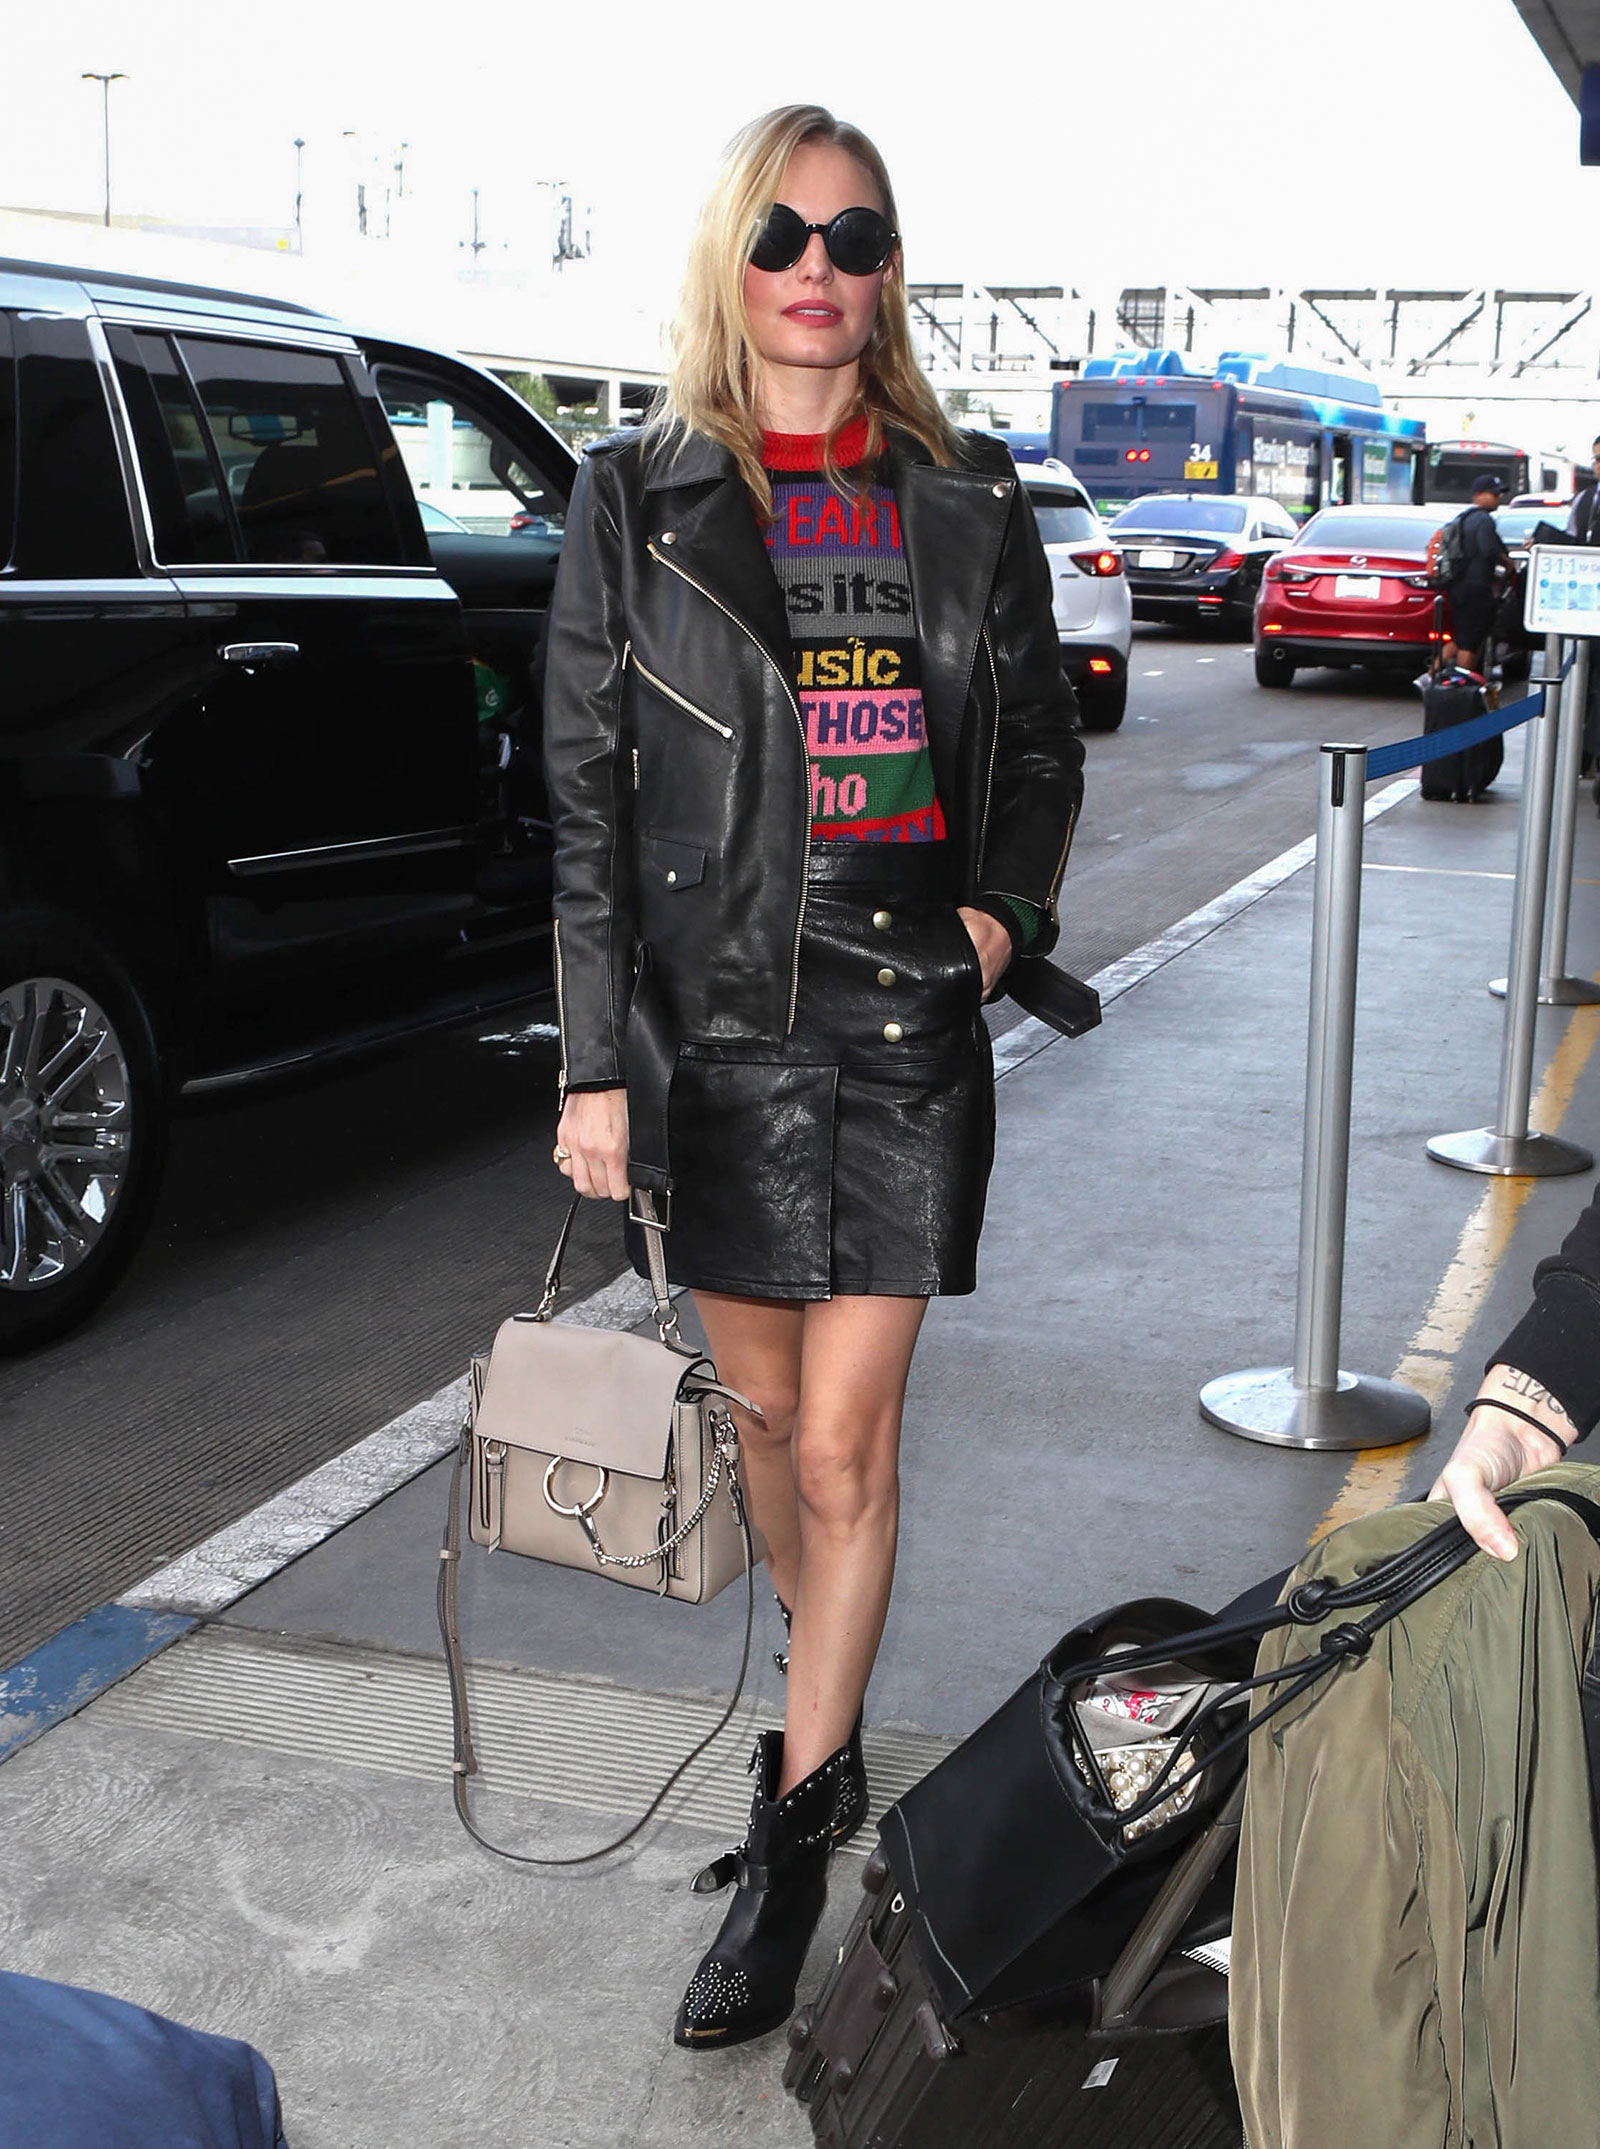 Kate Bosworth wears Etro's colorblock graphic sweater with an Anine Bing biker jacket, Frame leather mini skirt and moto boots.